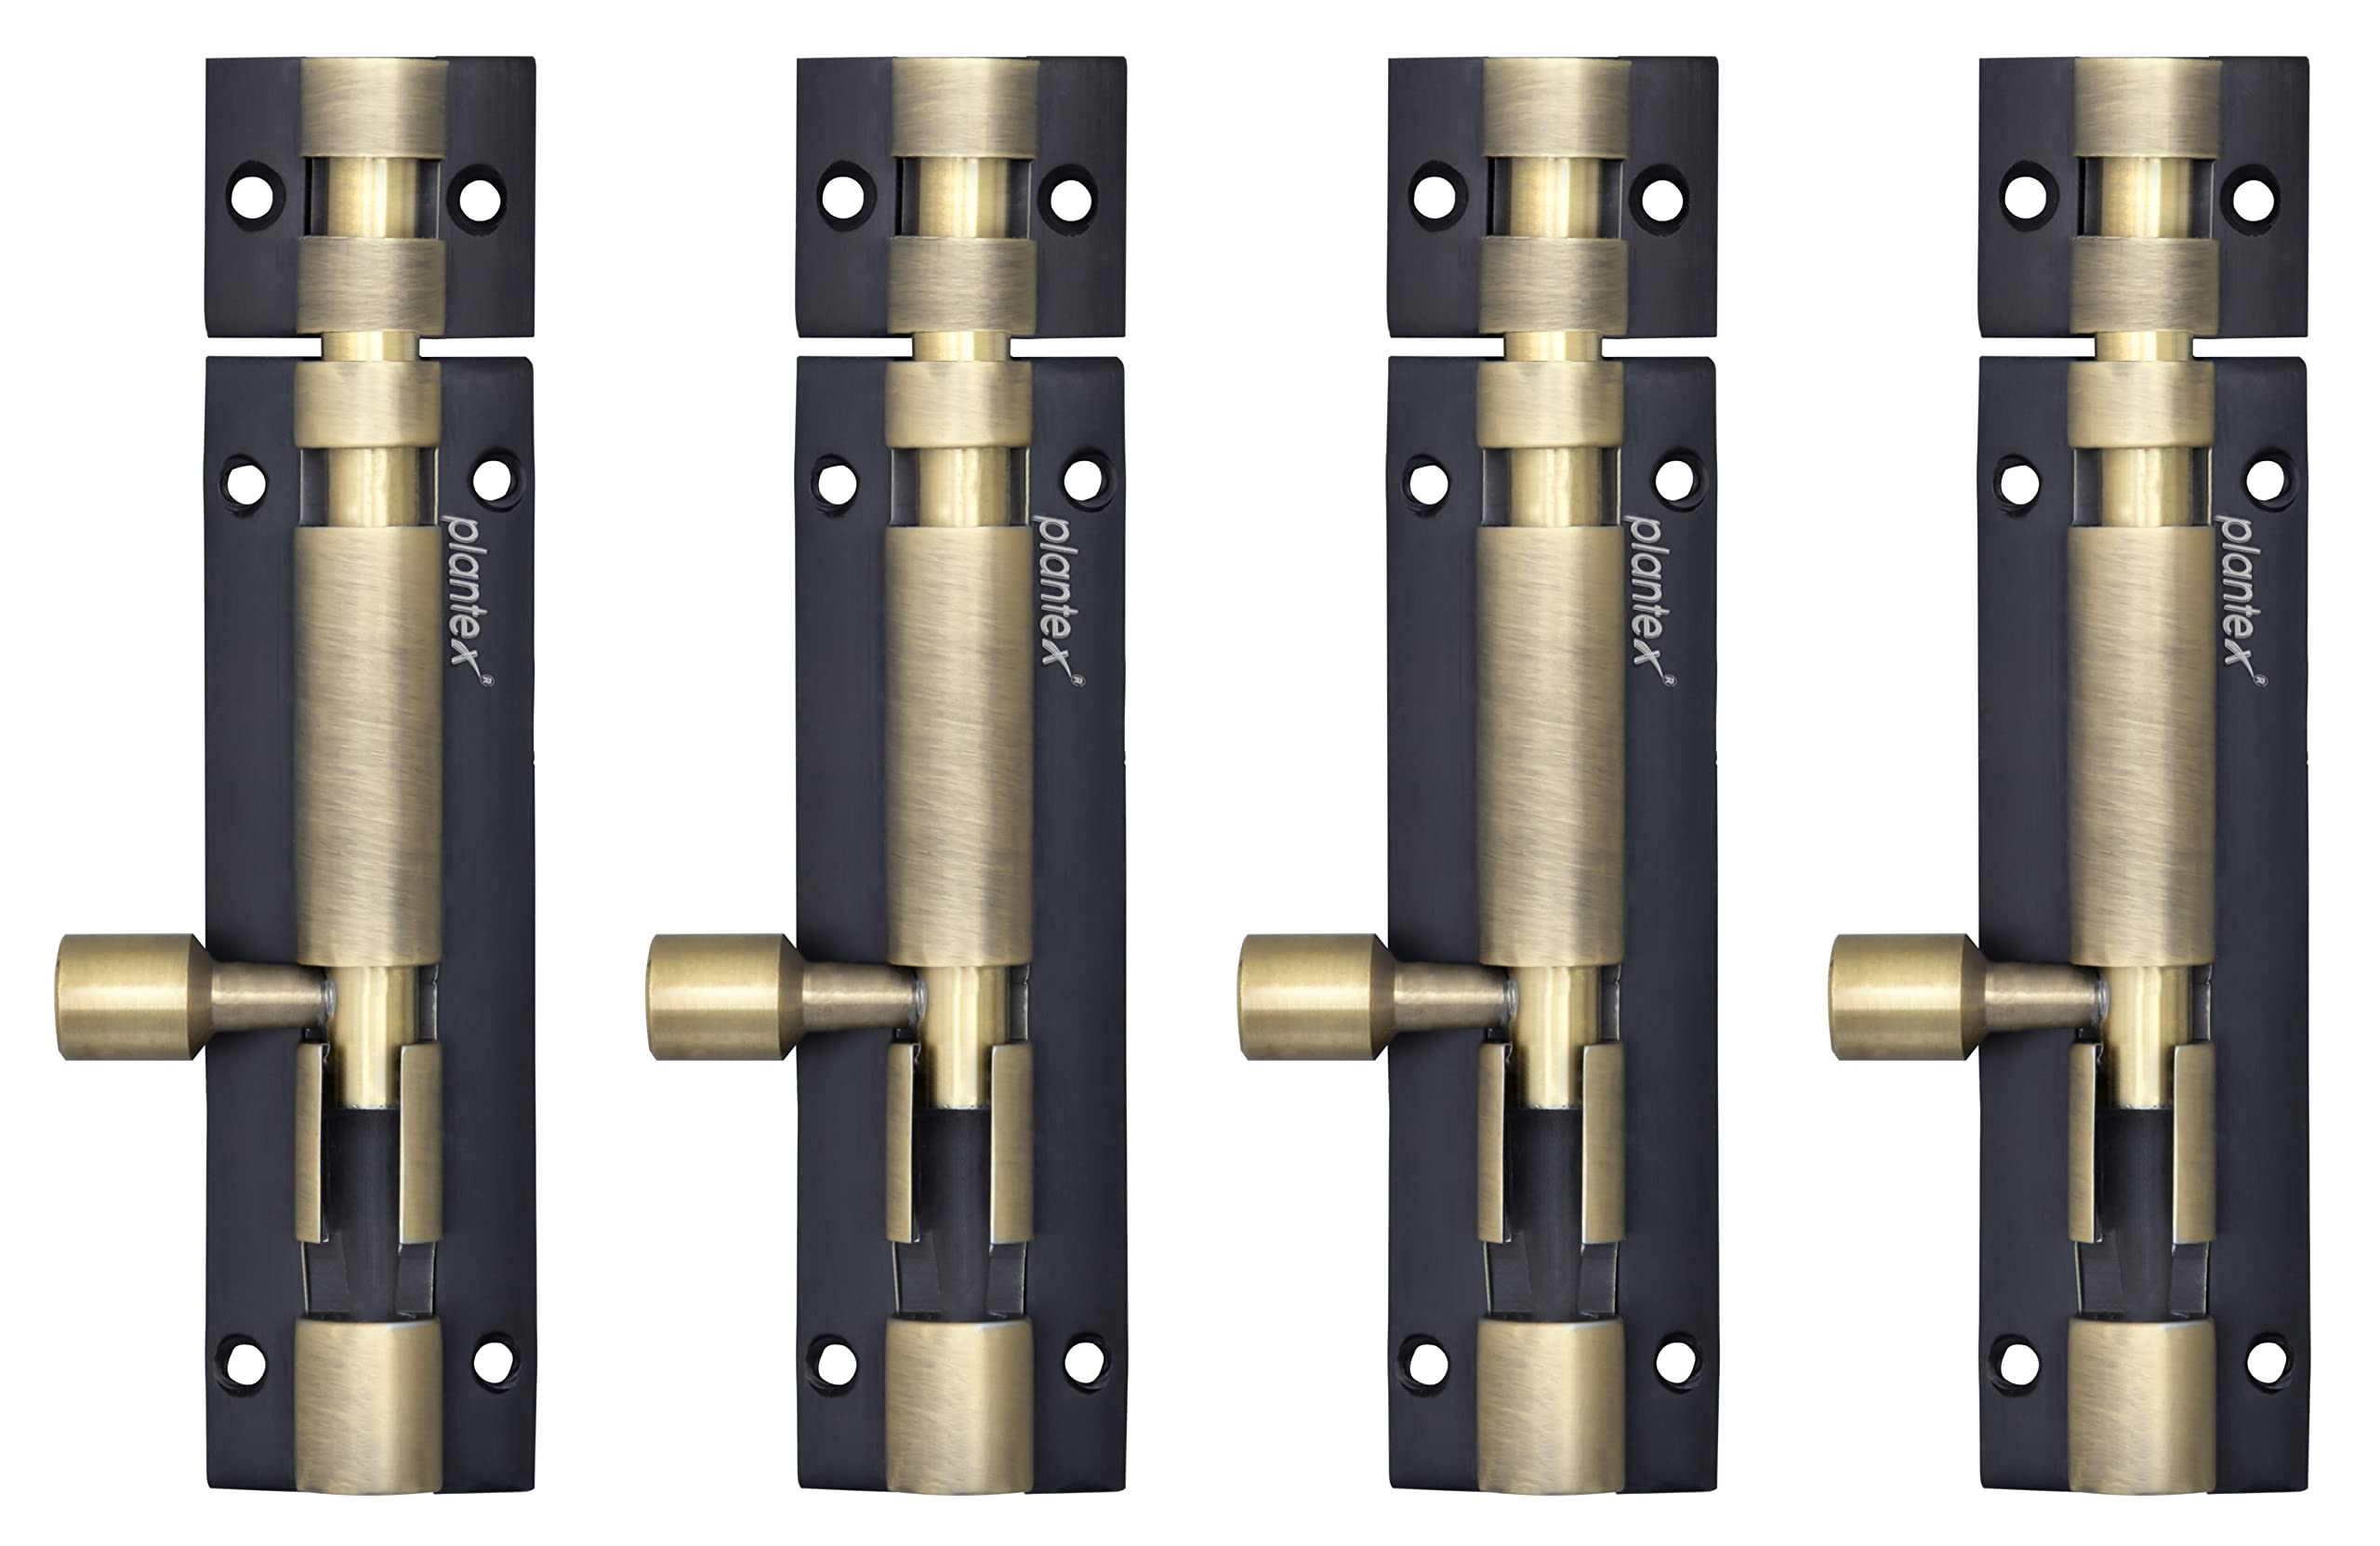 Plantex Heavy Duty 4-inch Joint-Less Tower Bolt for Wooden and PVC Doors for Home Main Door/Bathroom/Windows/Wardrobe - Pack of 4 (703, Brass Antique and Black)